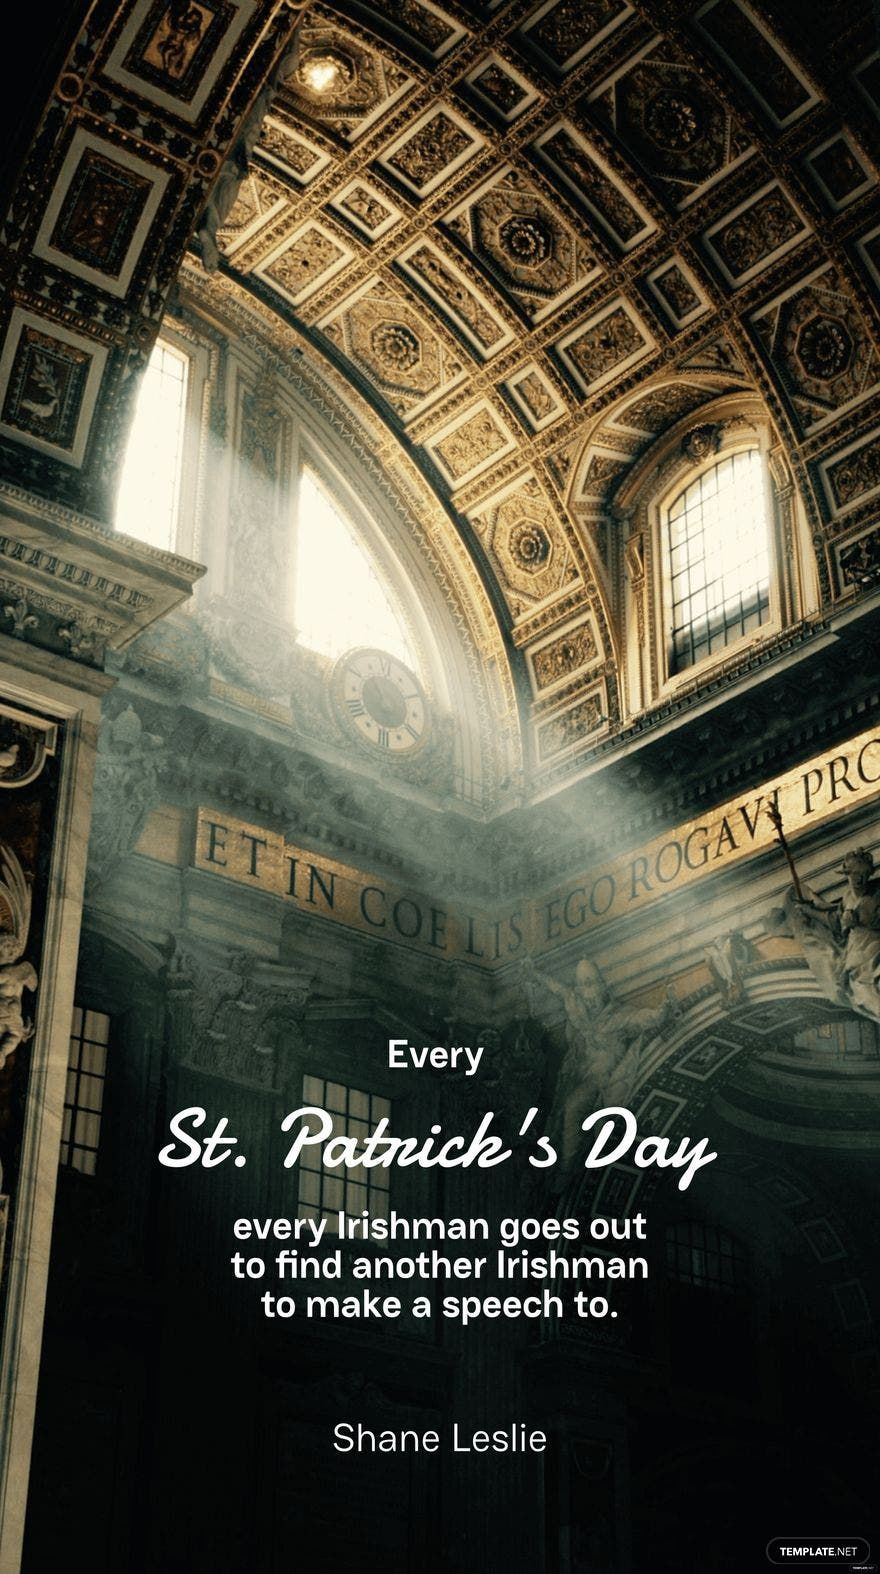 Shane Leslie - Every St. Patrick's Day, every Irishman goes out to find another Irishman to make a speech to.